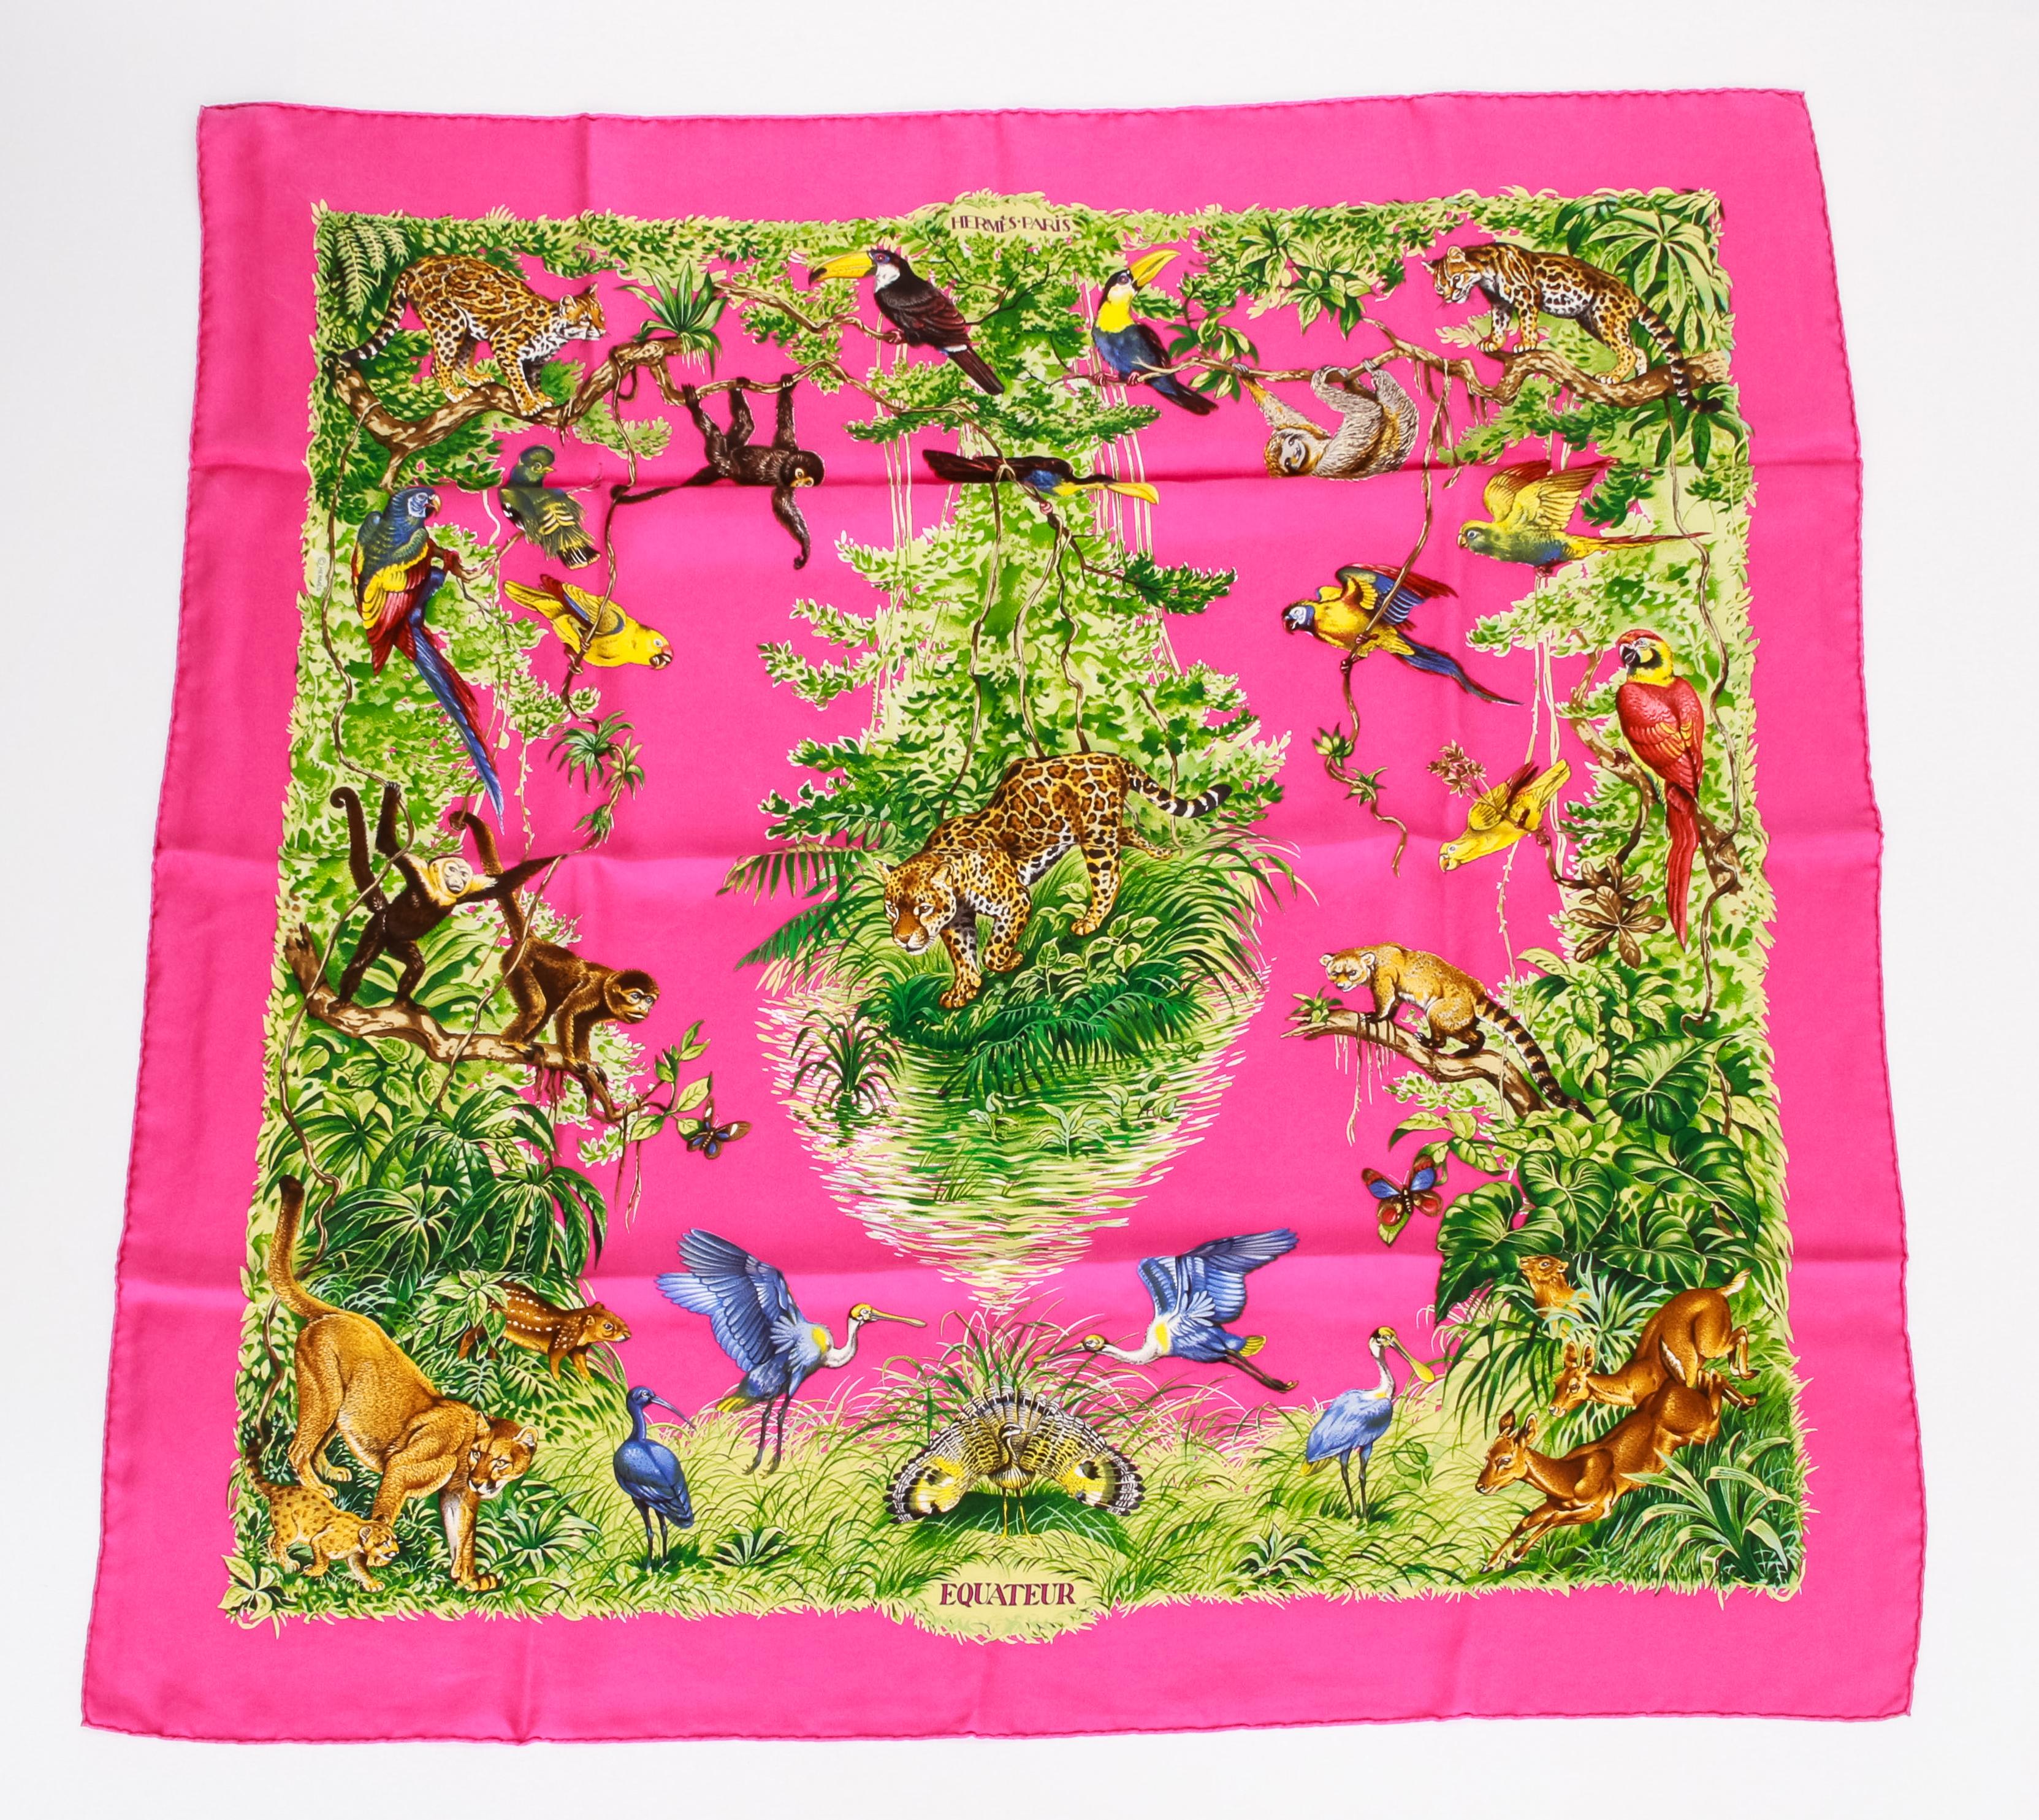 New Hermès Fuchsia Equateur Scarf in Box For Sale at 1stDibs | hermes ...